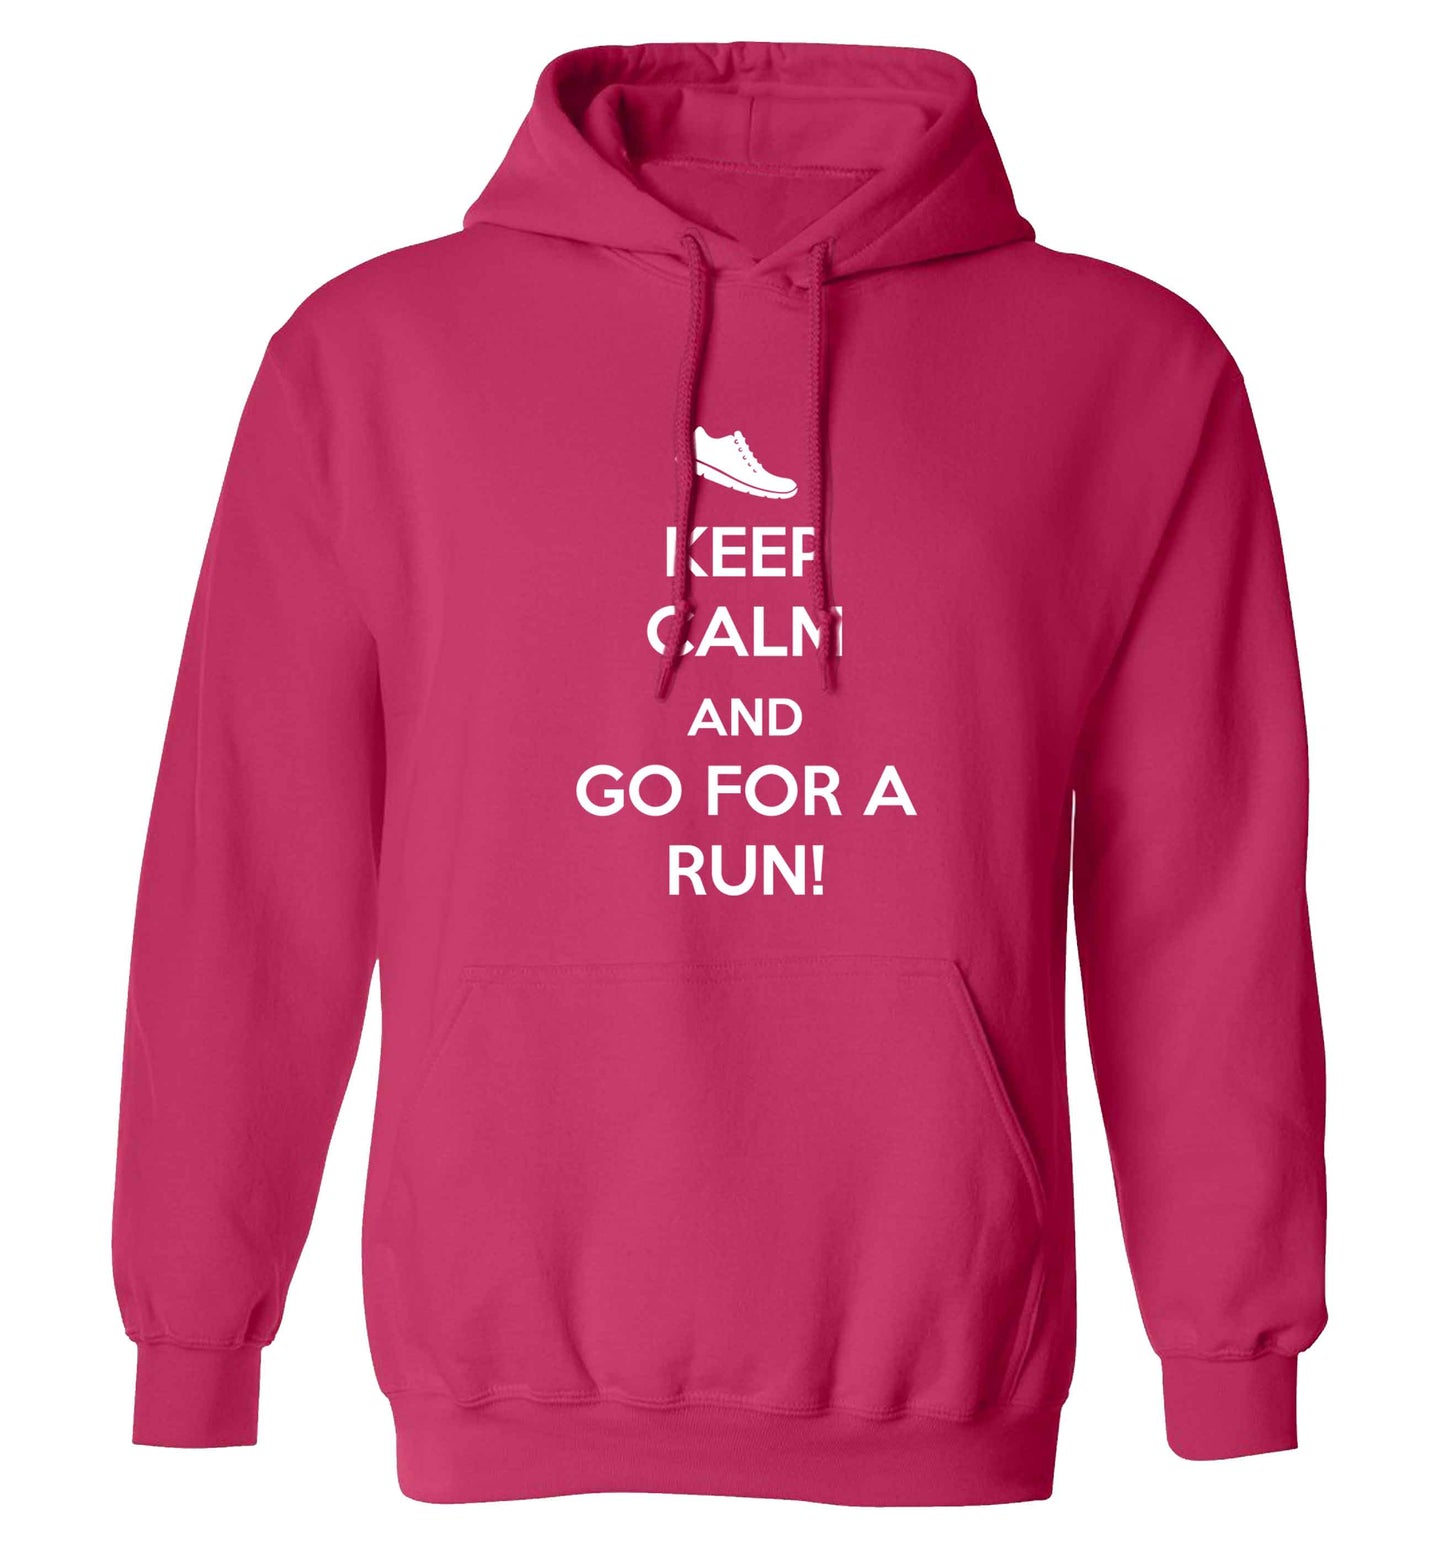 Keep calm and go for a run adults unisex pink hoodie 2XL